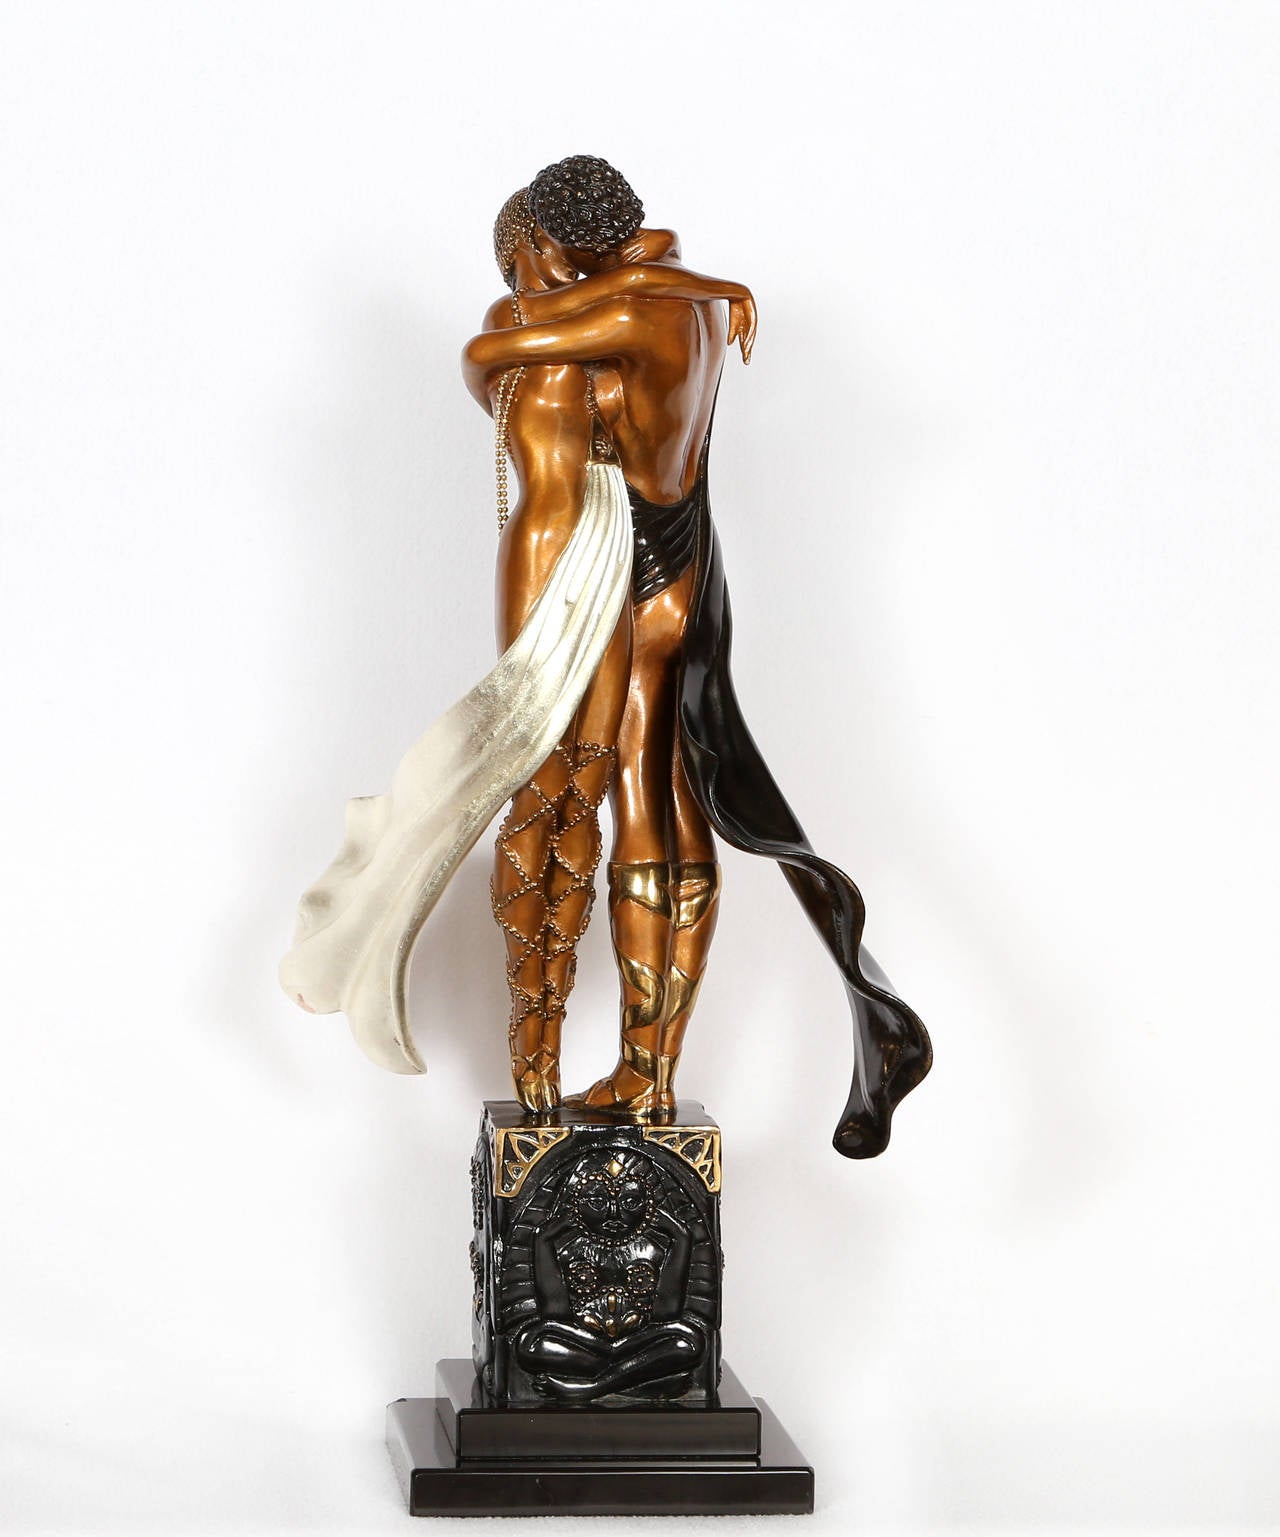 Artist: Erte
Title: Lovers and Idol
Year: 1988
Medium: Bronze Sculpture with patina, signature inscribed
Edition: 329/375
Size: 20  x 8  x 6 in. (50.8  x 20.32  x 15.24 cm)